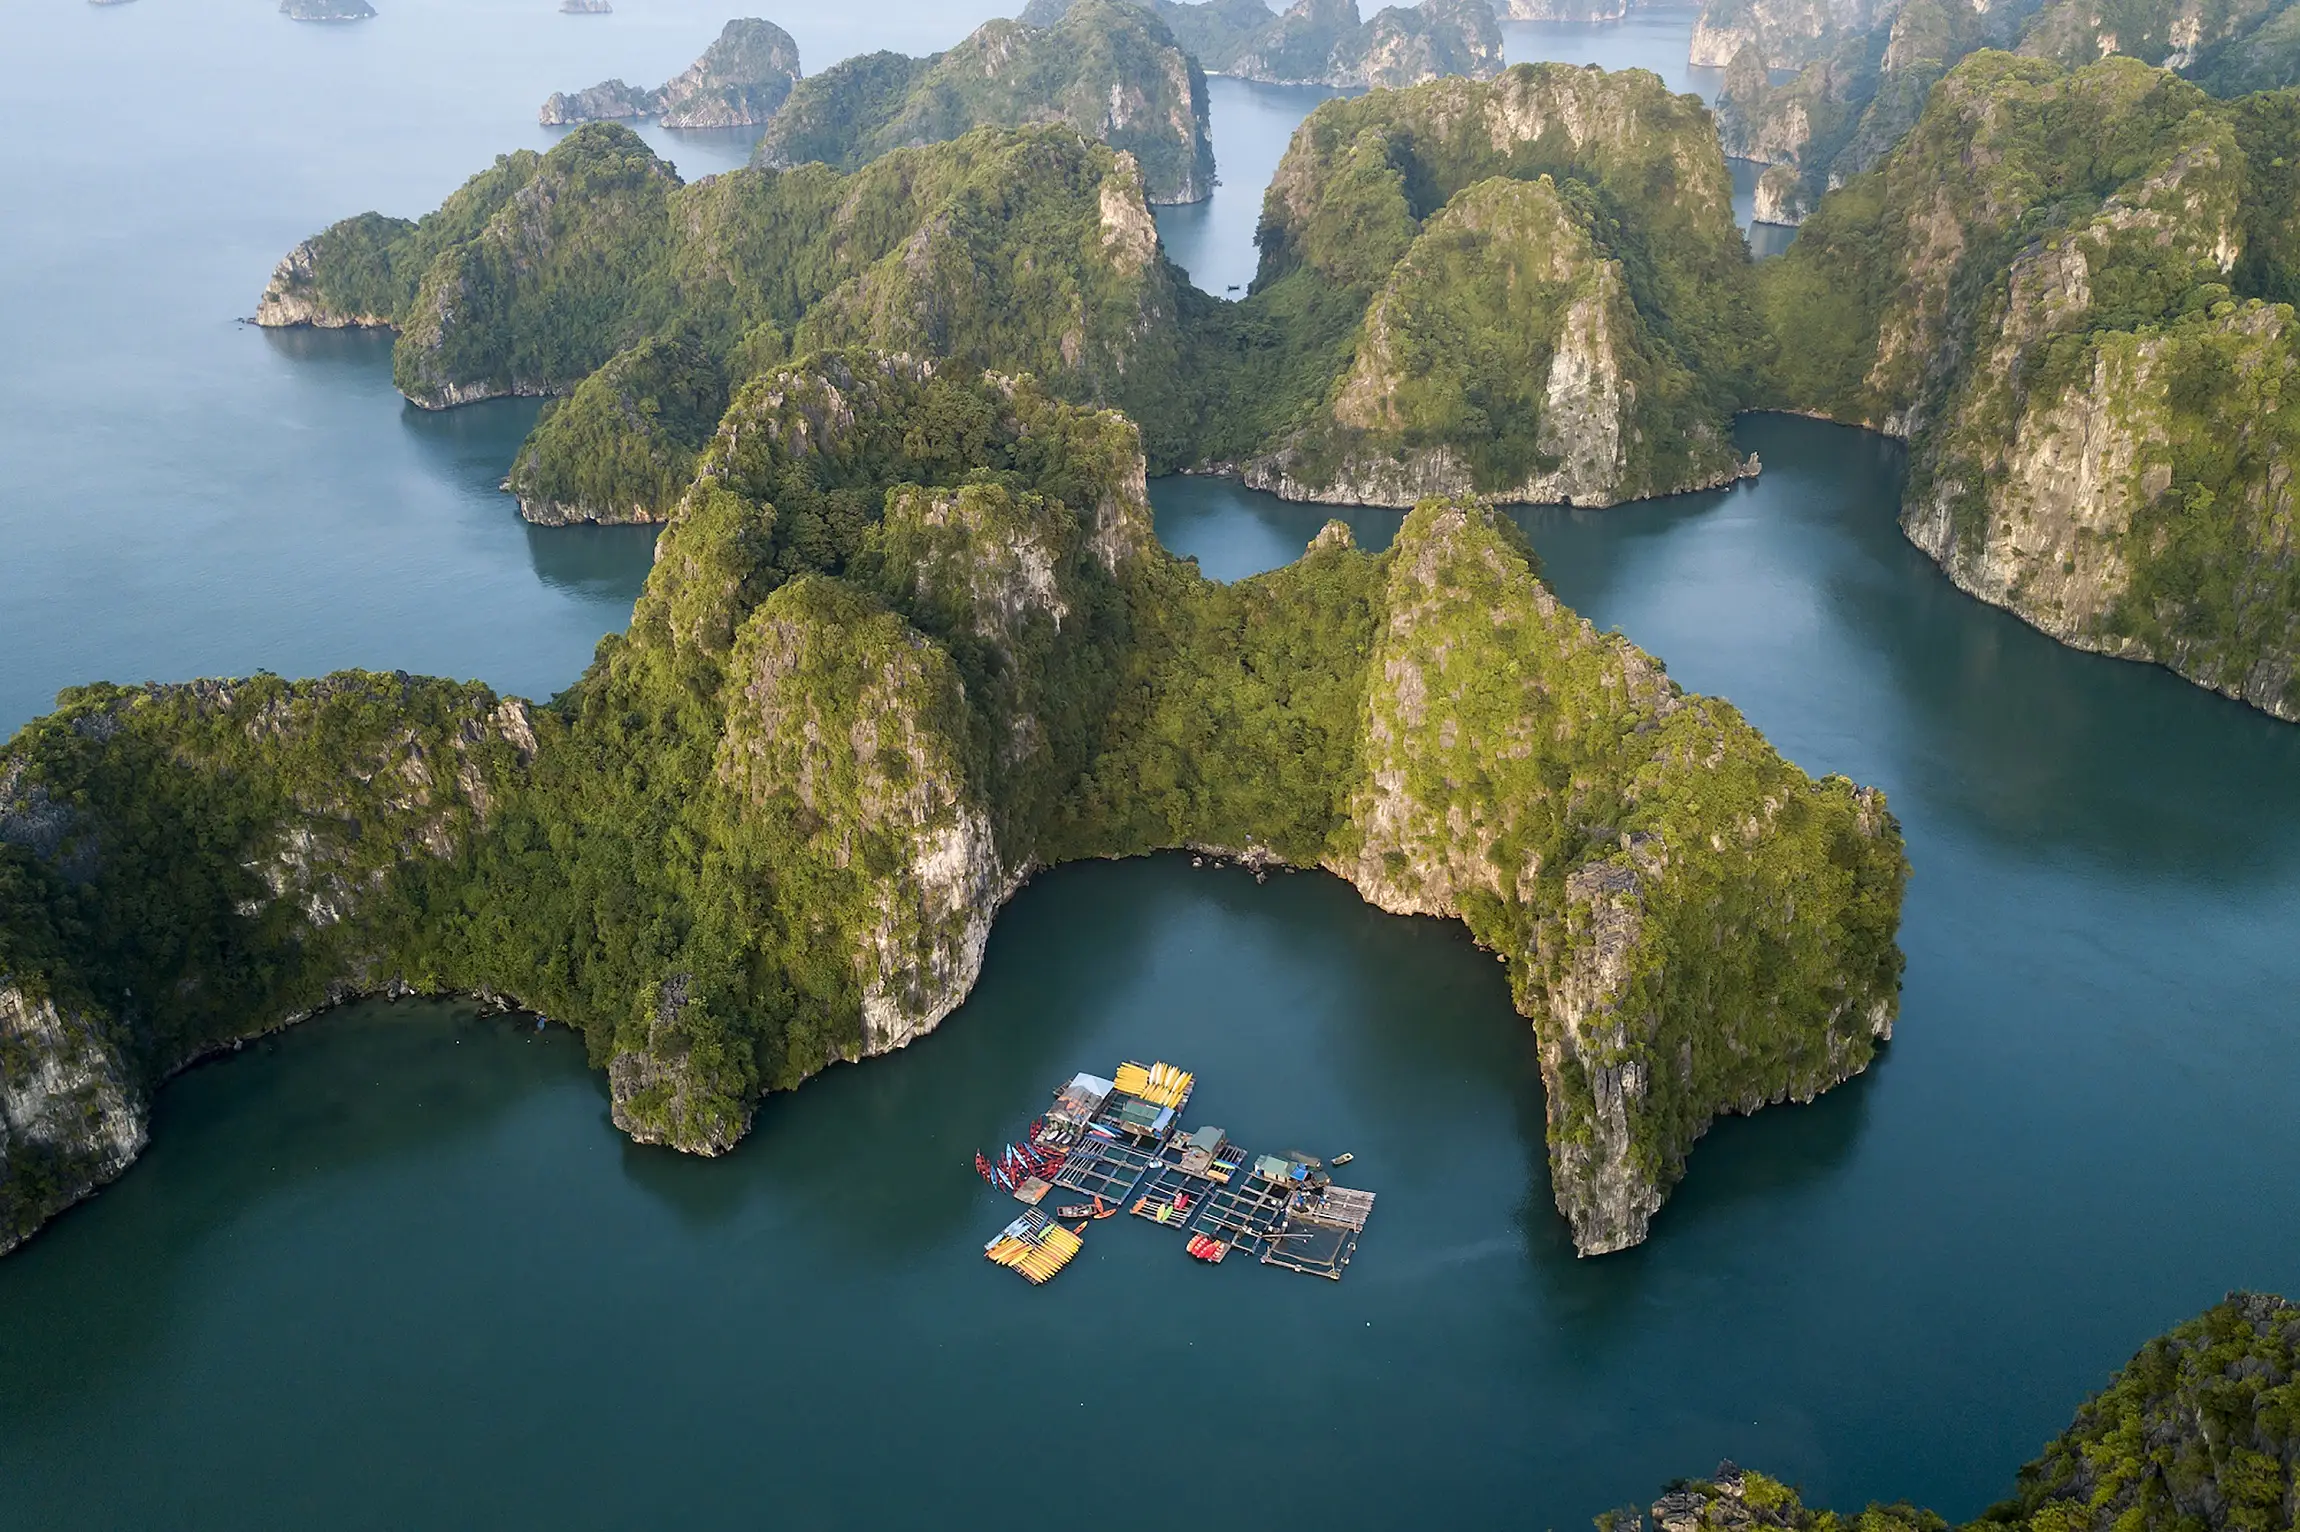 The Most Basic Travel Guide About Tour Halong Bay And Sapa